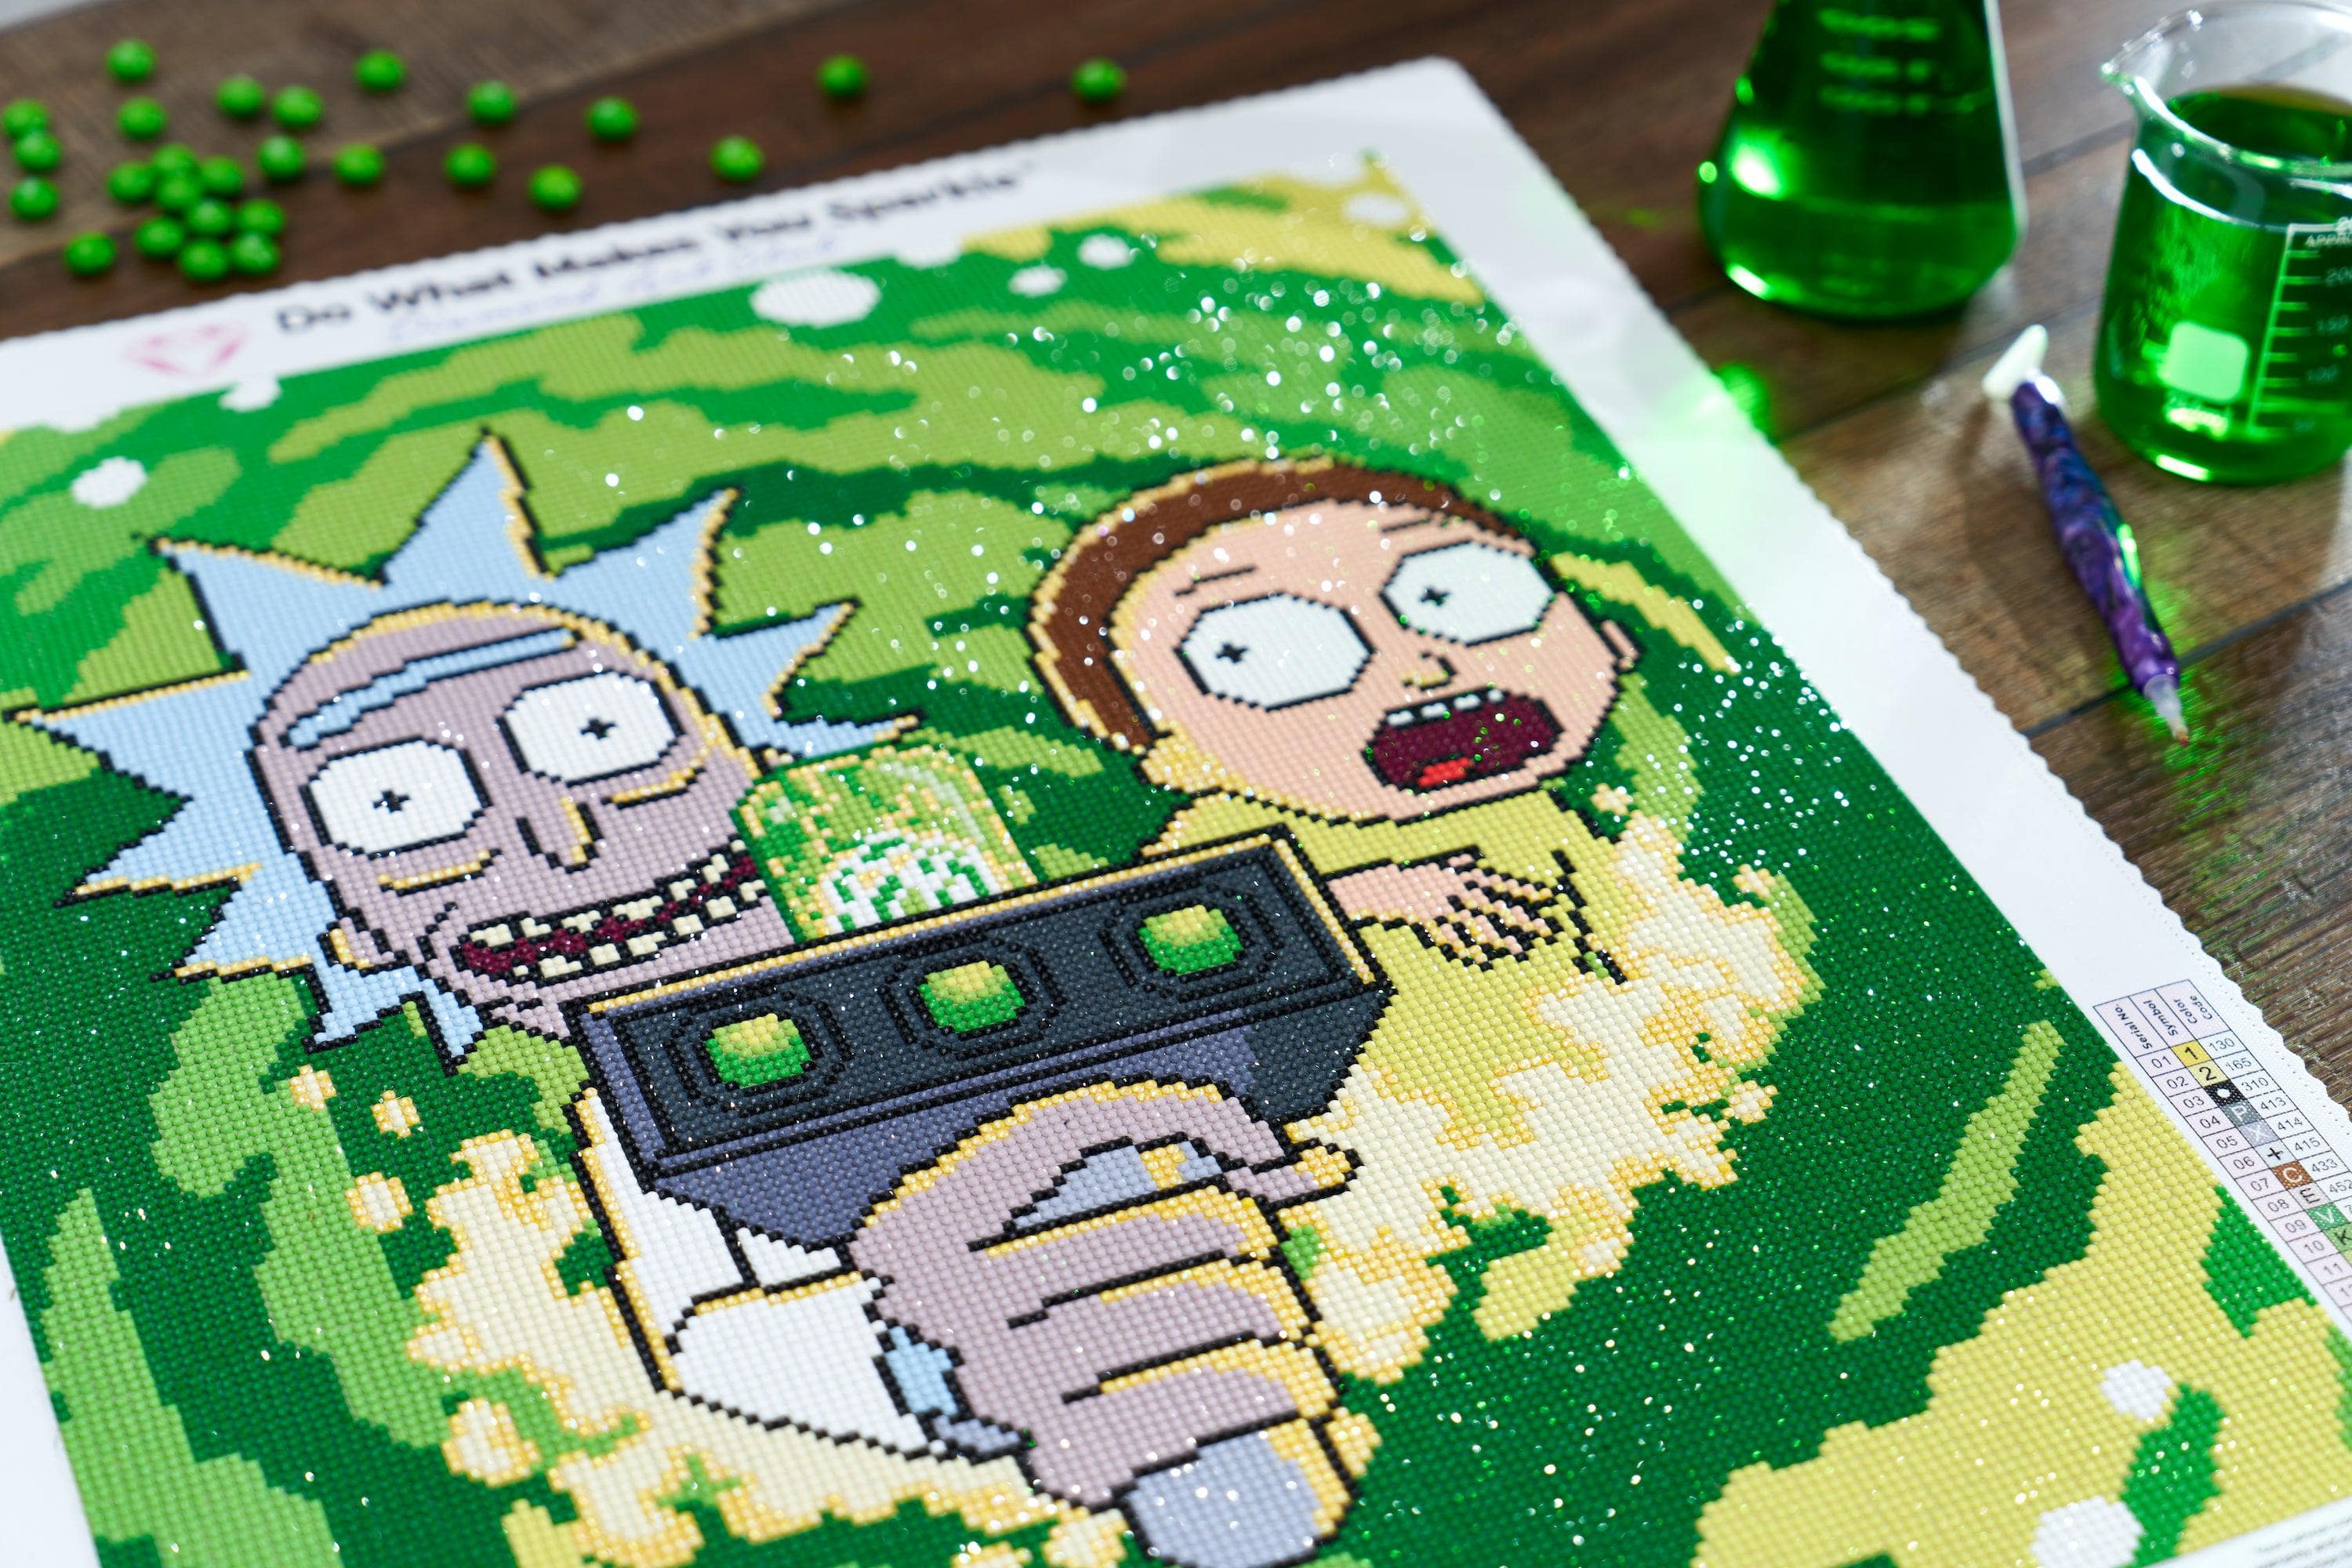 Rick and Morty mario bros – Piece by Piece - Diamond Paint Therapy